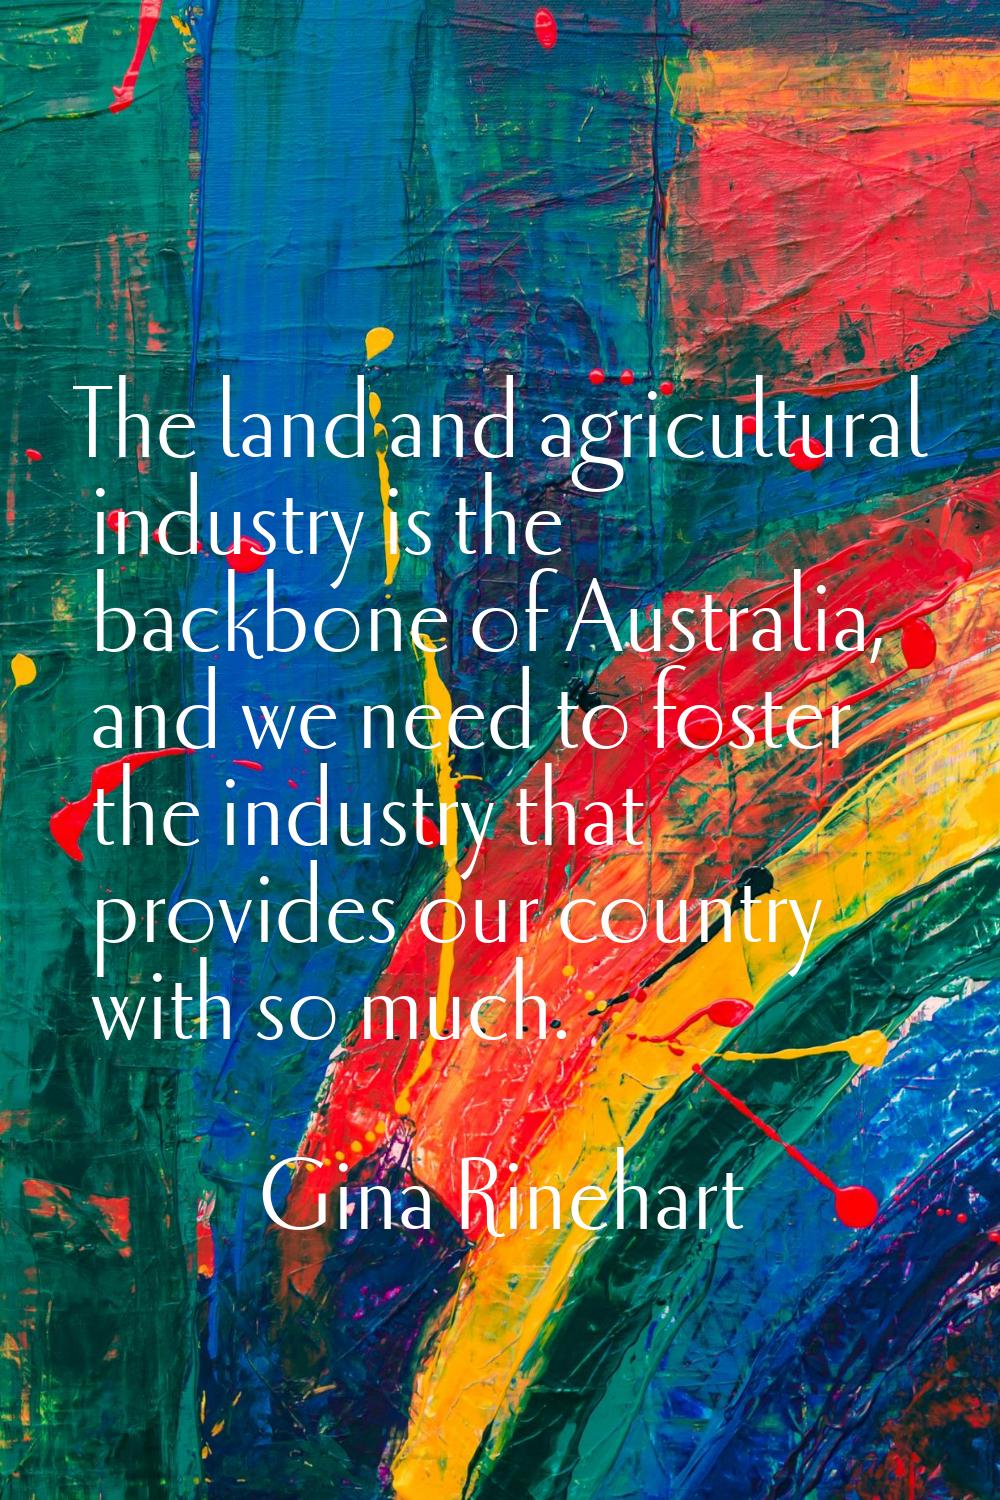 The land and agricultural industry is the backbone of Australia, and we need to foster the industry